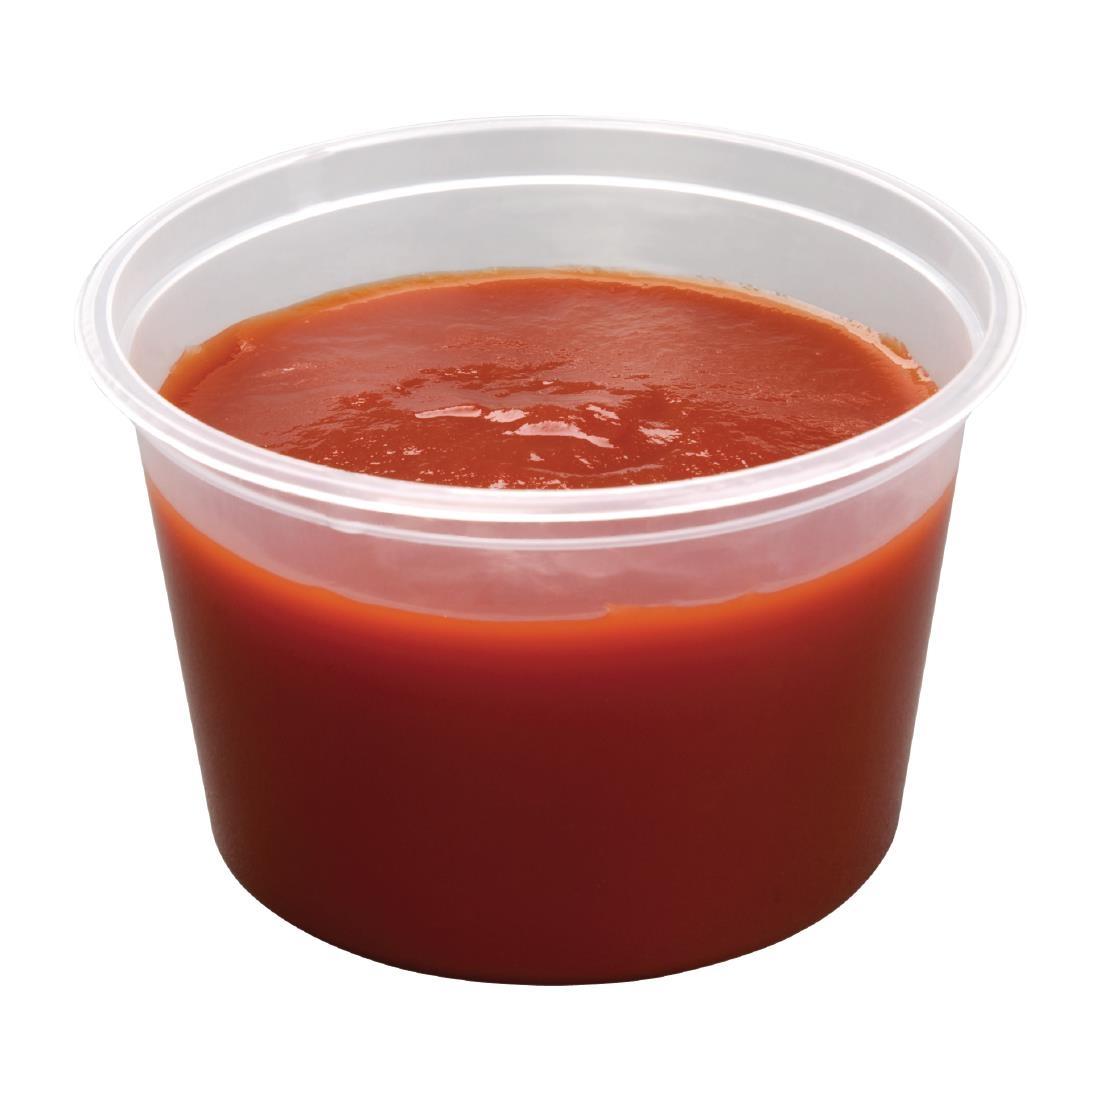 Fiesta Recyclable Plastic Microwavable Deli Pots 100ml / 3.5oz (Pack of 100) - CT286  - 4